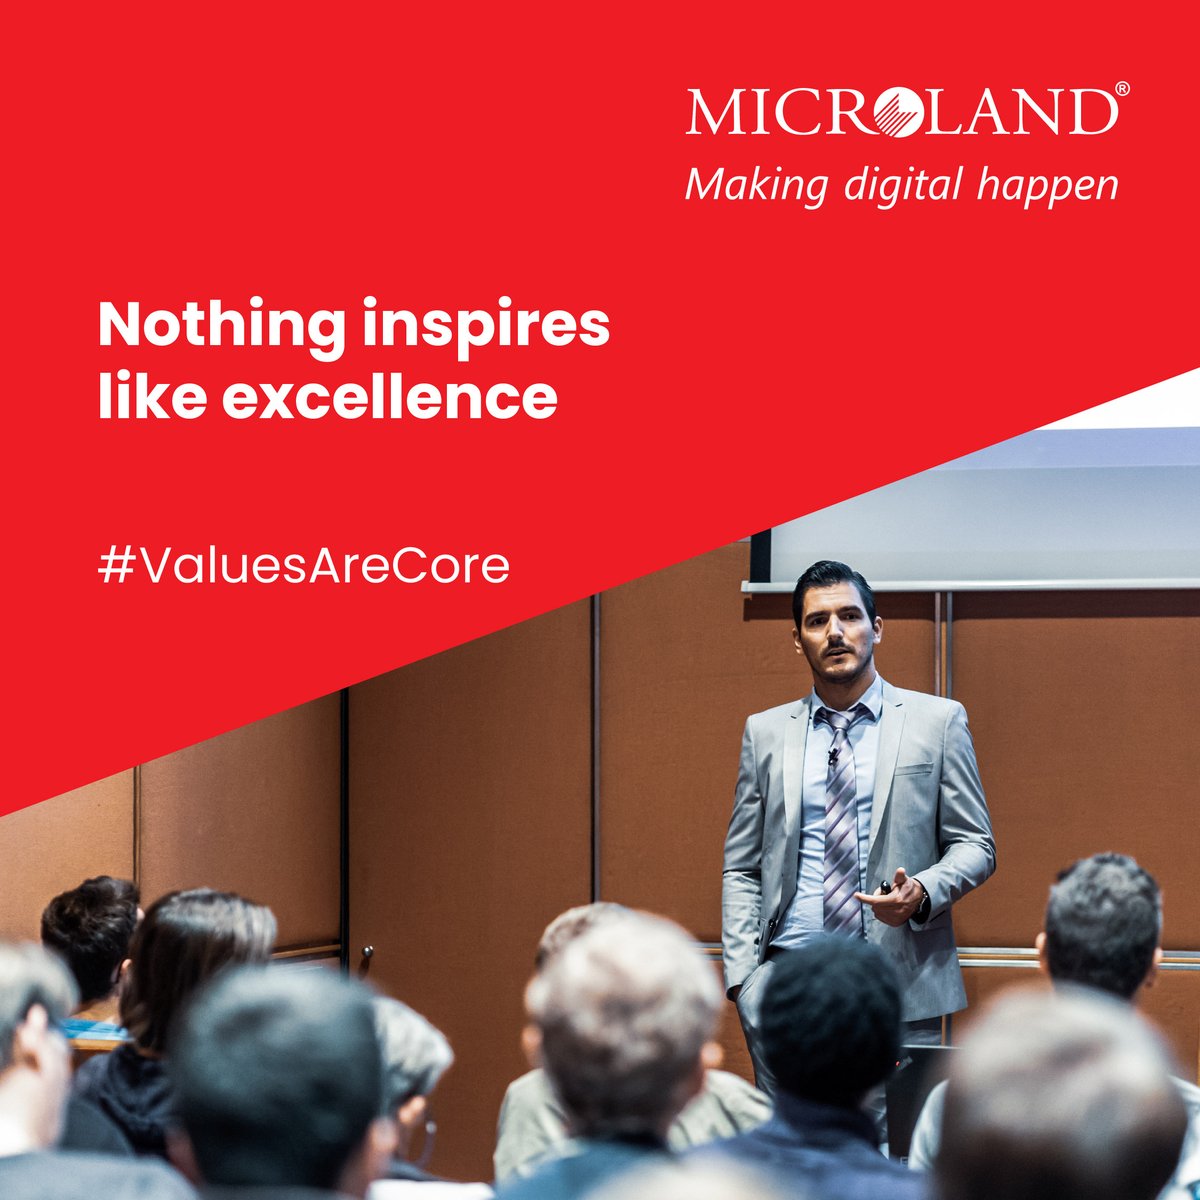 Defining innovation, raising the bar and leading the way to the extraordinary. That’s excellence to us - unmatched in power and limitless in reach. #ValuesAreCore #Microland #Excellence #MakingDigitalHappen #ML35